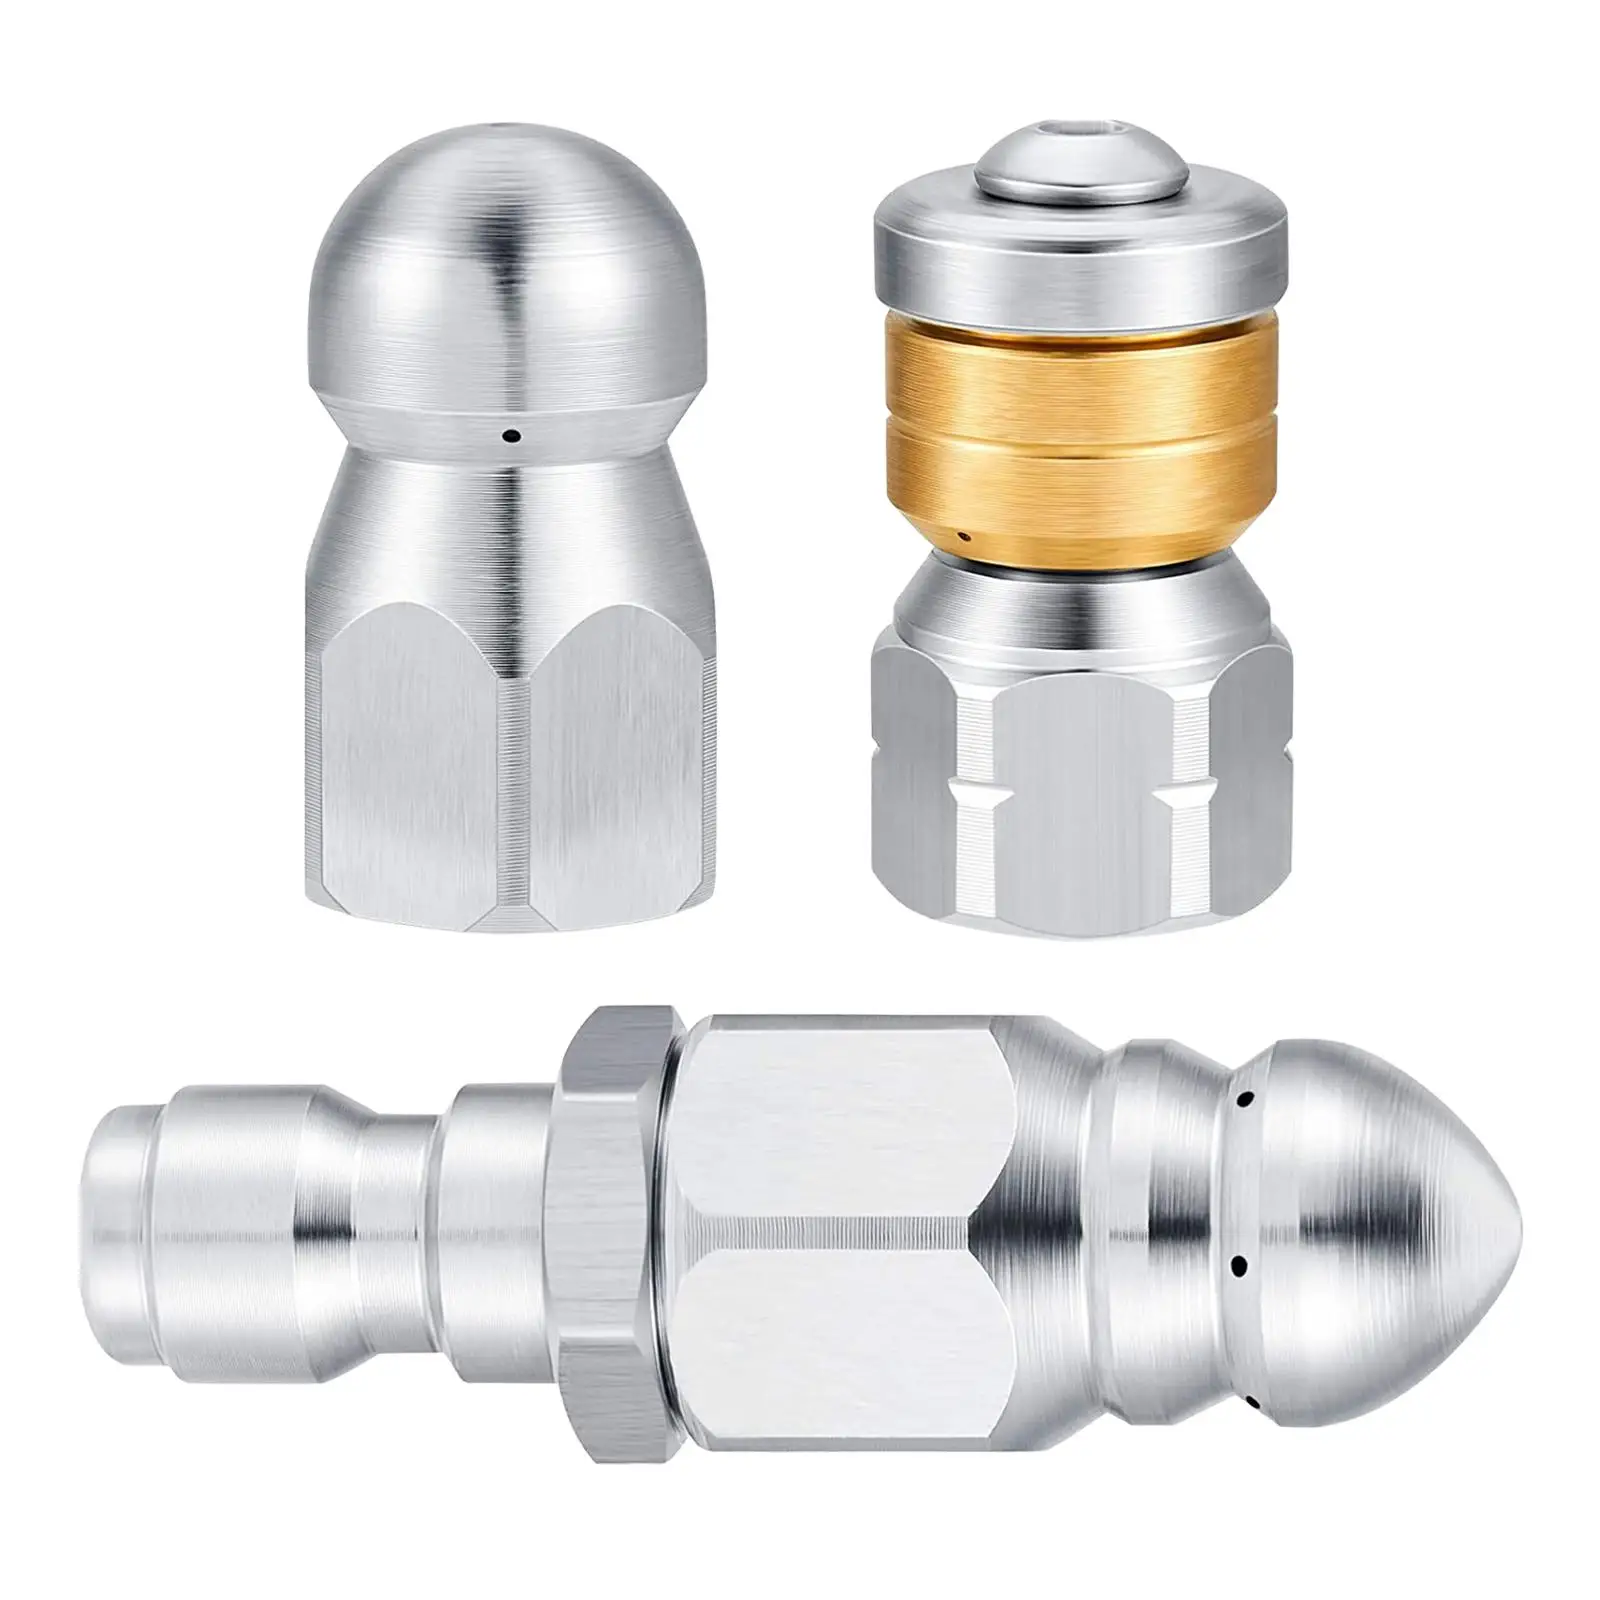 3 Pieces Sewer Jetter Nozzle Stainless Steel Pressure up to 5000PSI Fixed Sewer Nozzle for Pressure Washer Drain Jetting Hose